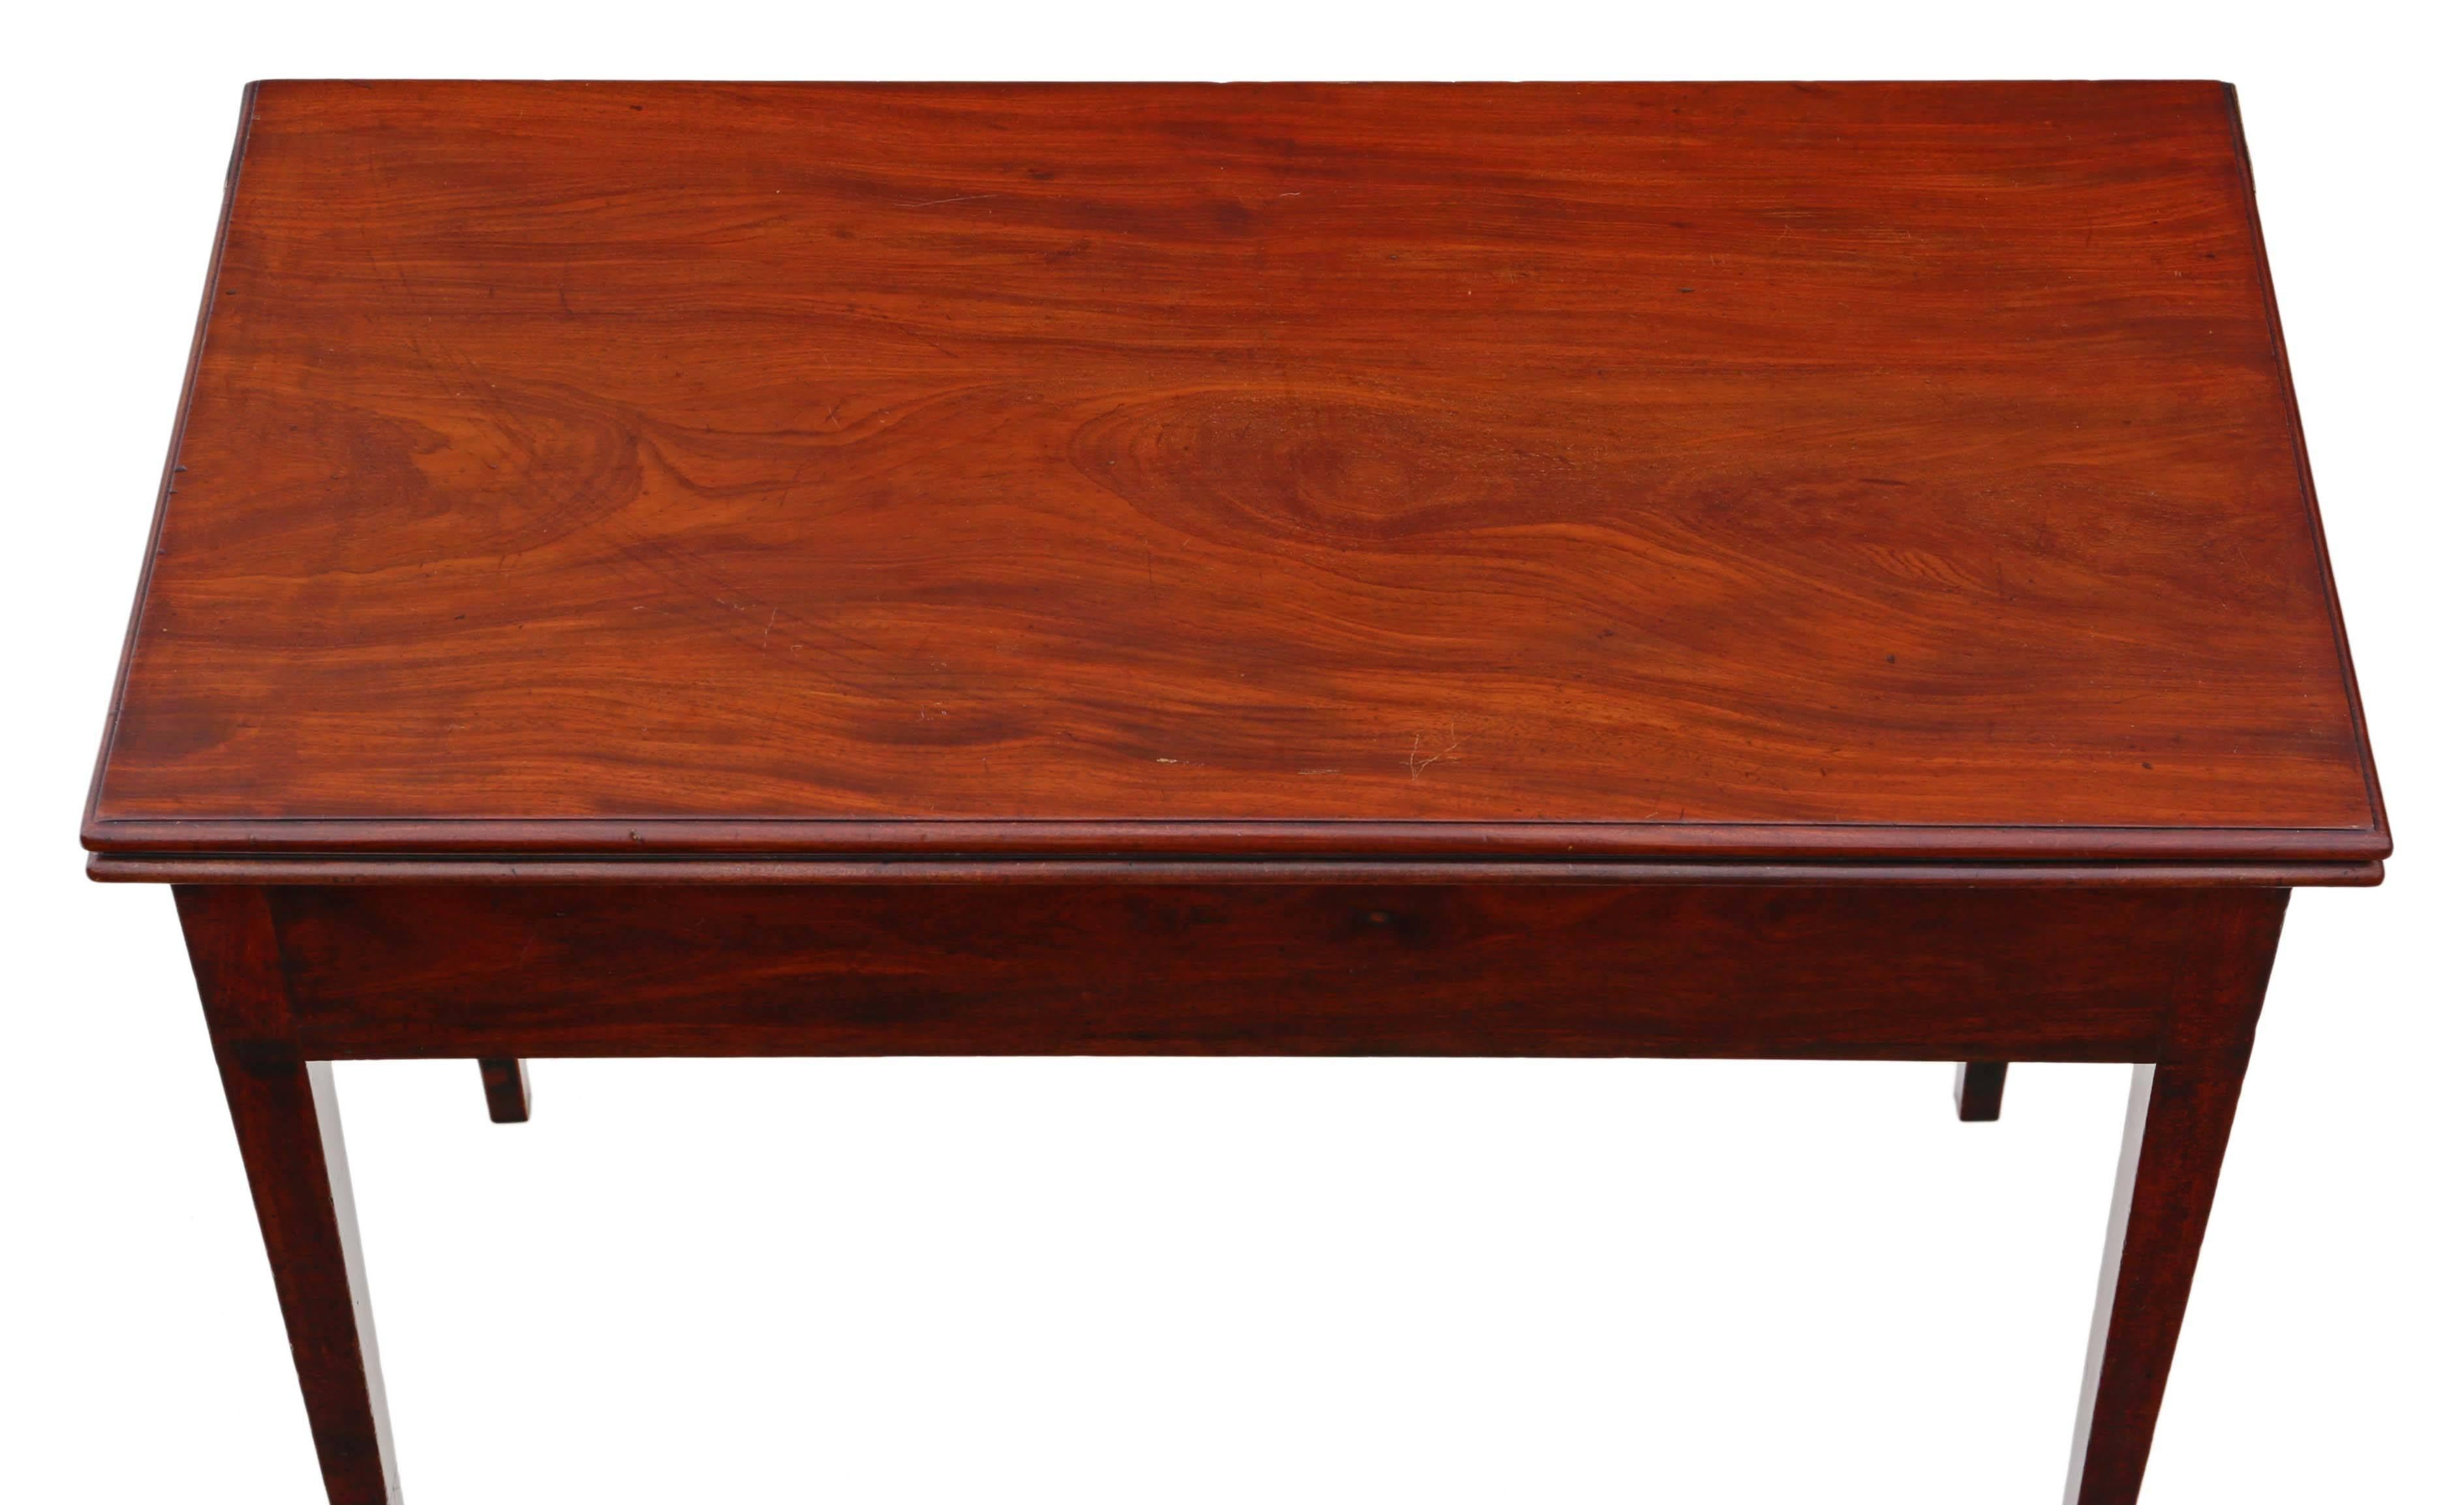 Antique Georgian circa 1800 mahogany folding tea table, that would also make a charming card or console table.

This is a lovely table, that is full of age, charm and character.

Solid, with no loose joints and a solid mahogany top. No